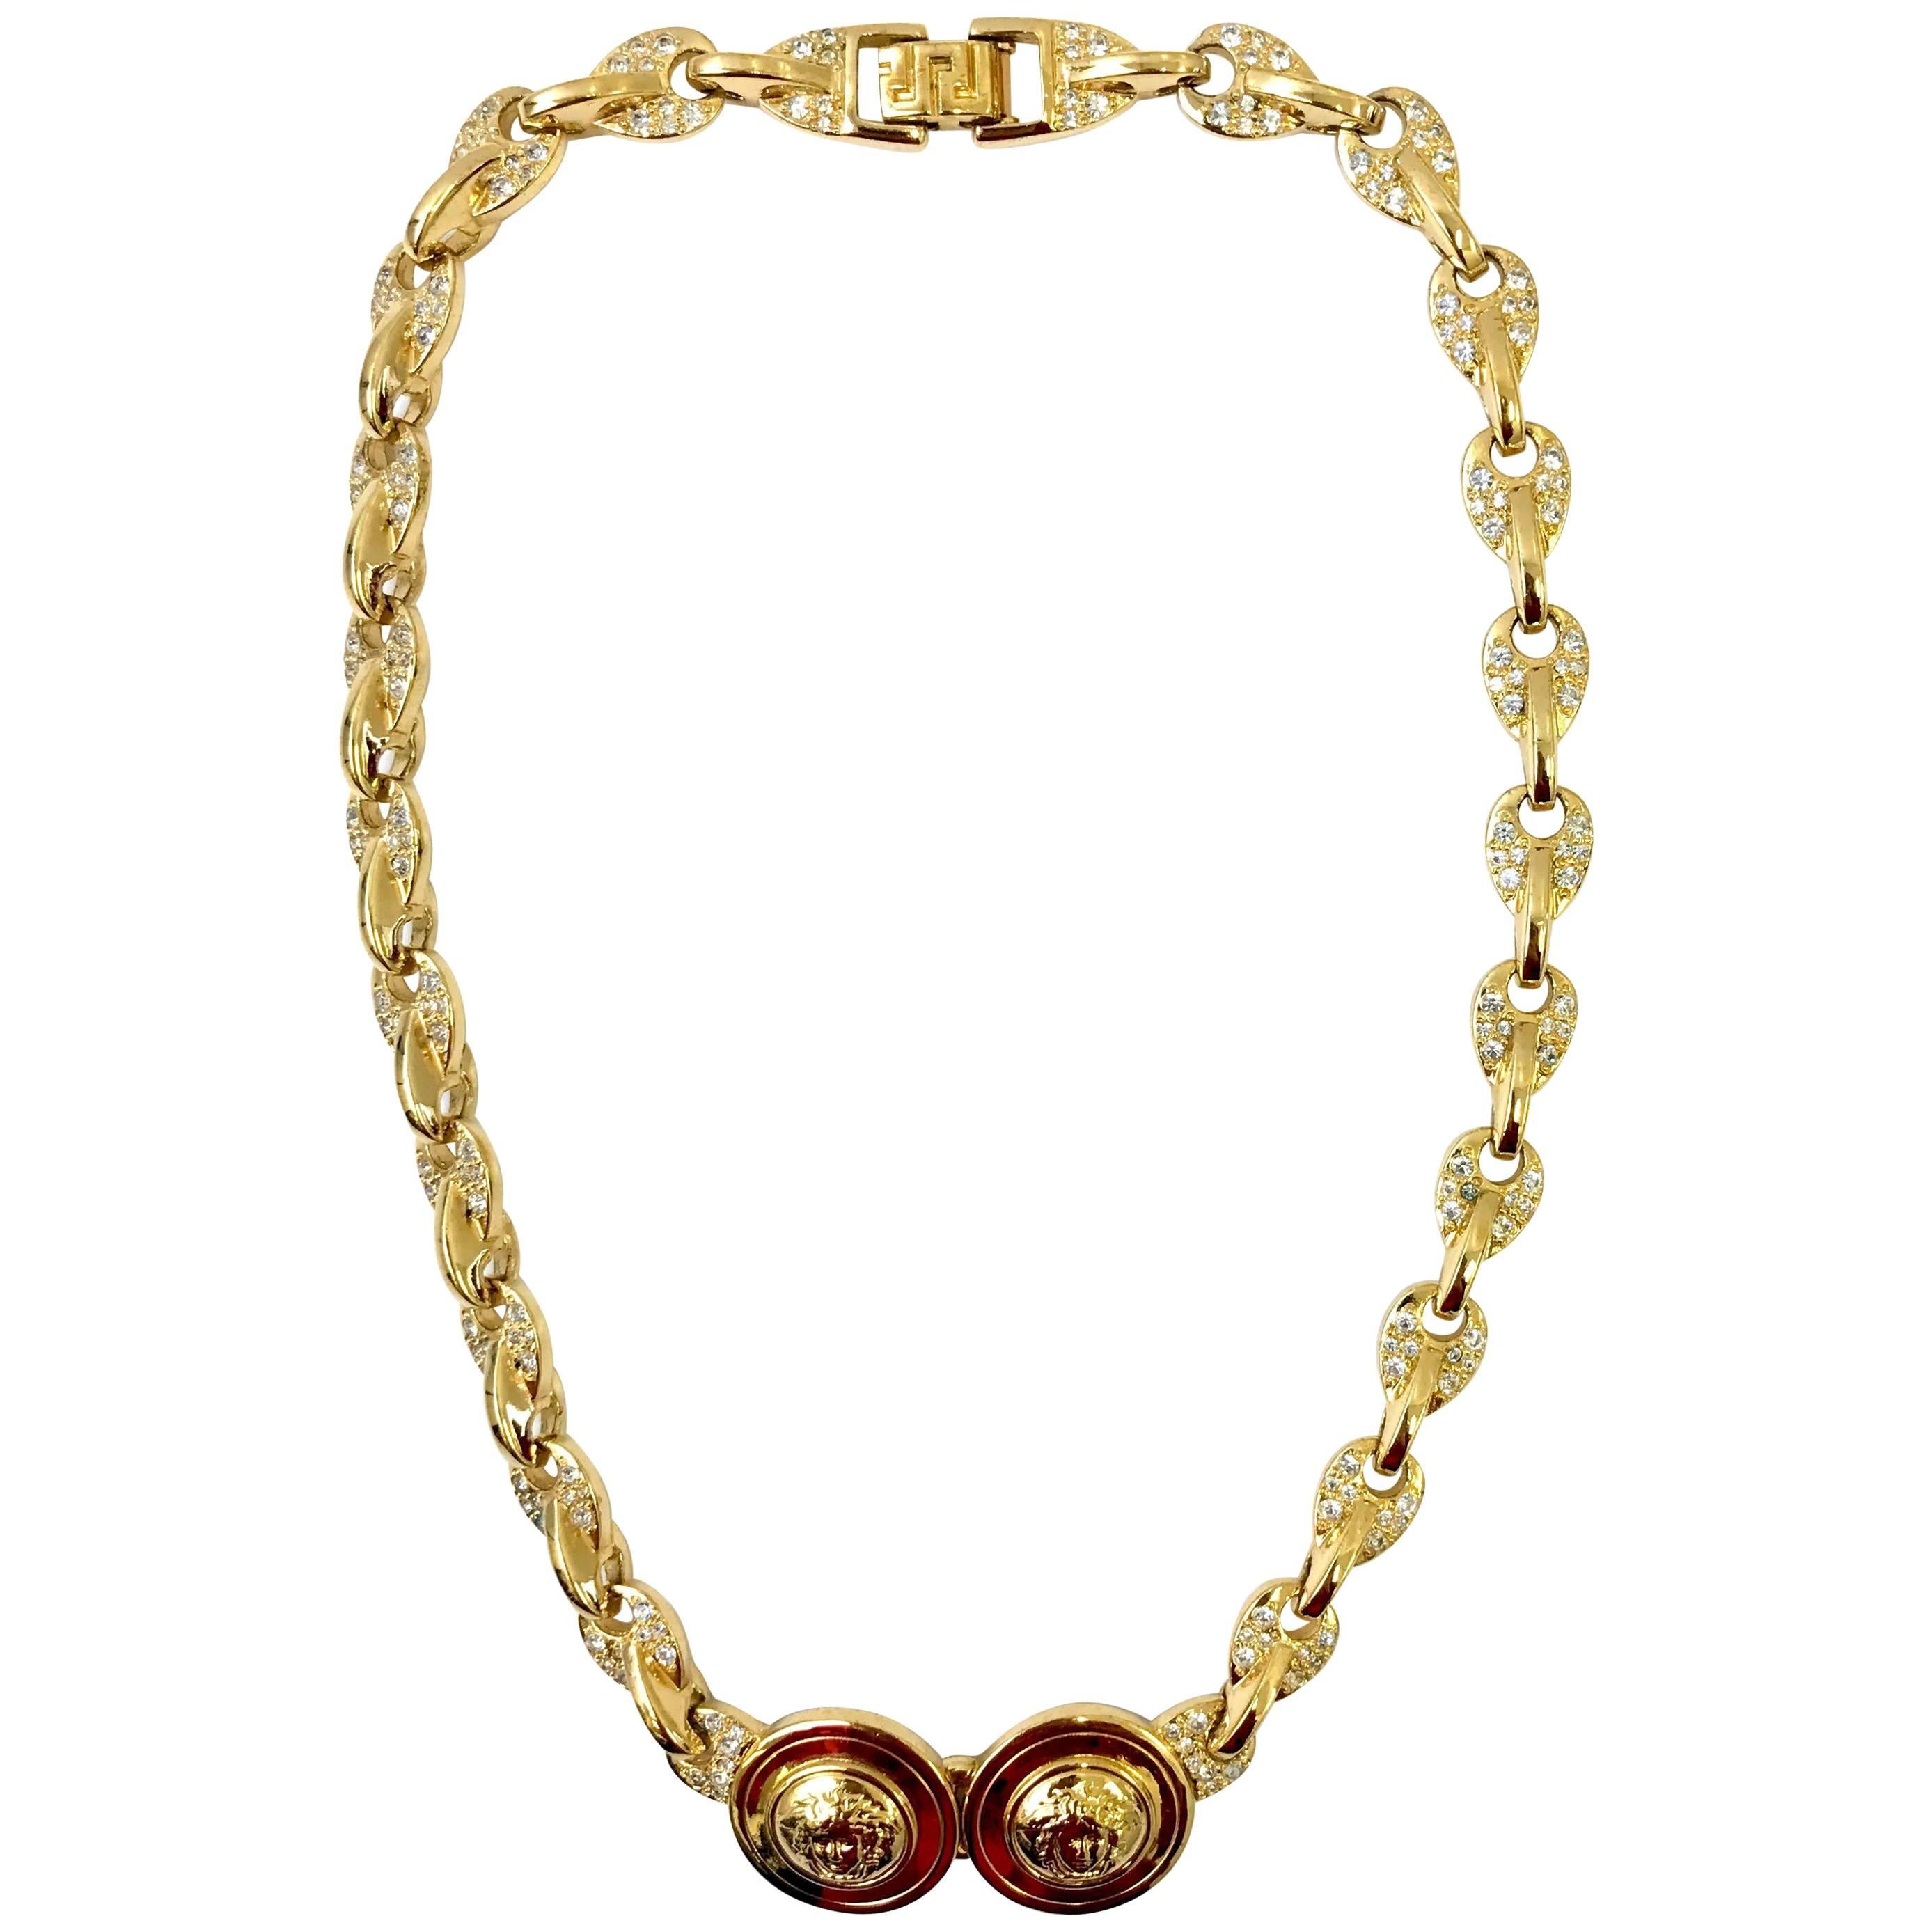 Gianni Versace gold double medusa head necklace with rhinestones, 1990s  For Sale